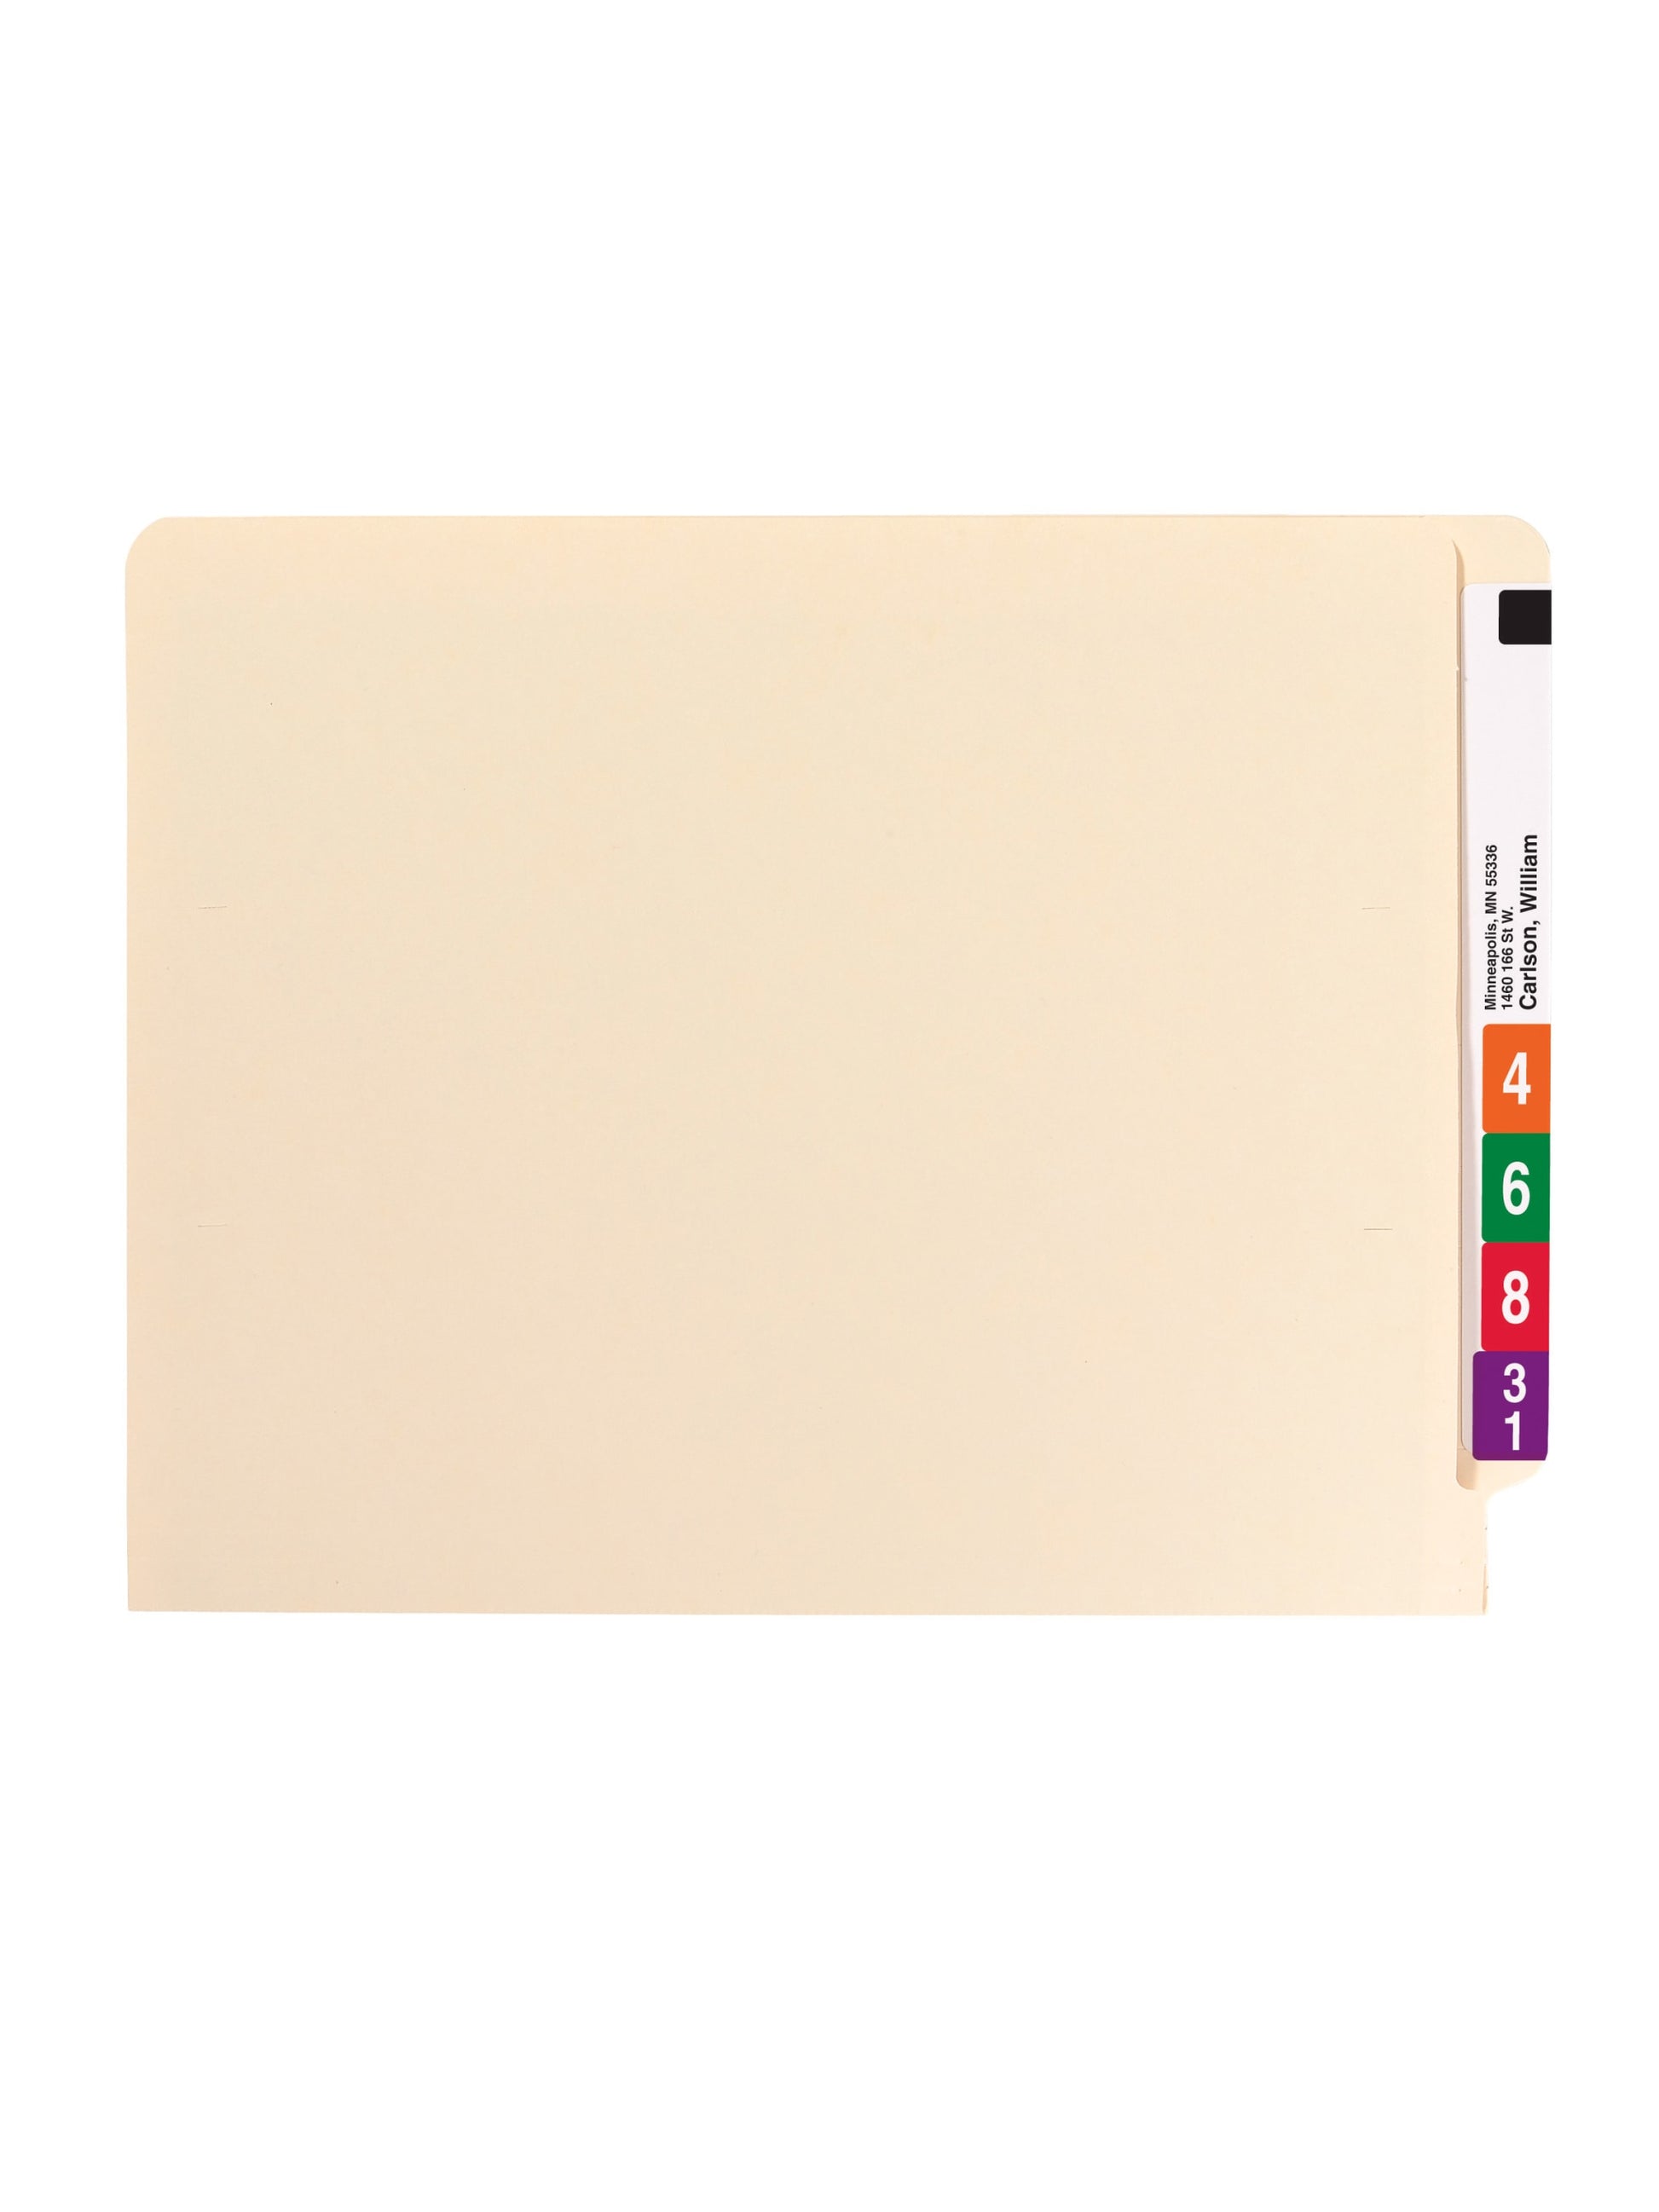 Shelf-Master® Reinforced End Tab Fastener File Folders with Antimicrobial Product Protection, Straight-Cut Tab, 2 Fasteners, Manila Color, Letter Size, Set of 50, 086486341165